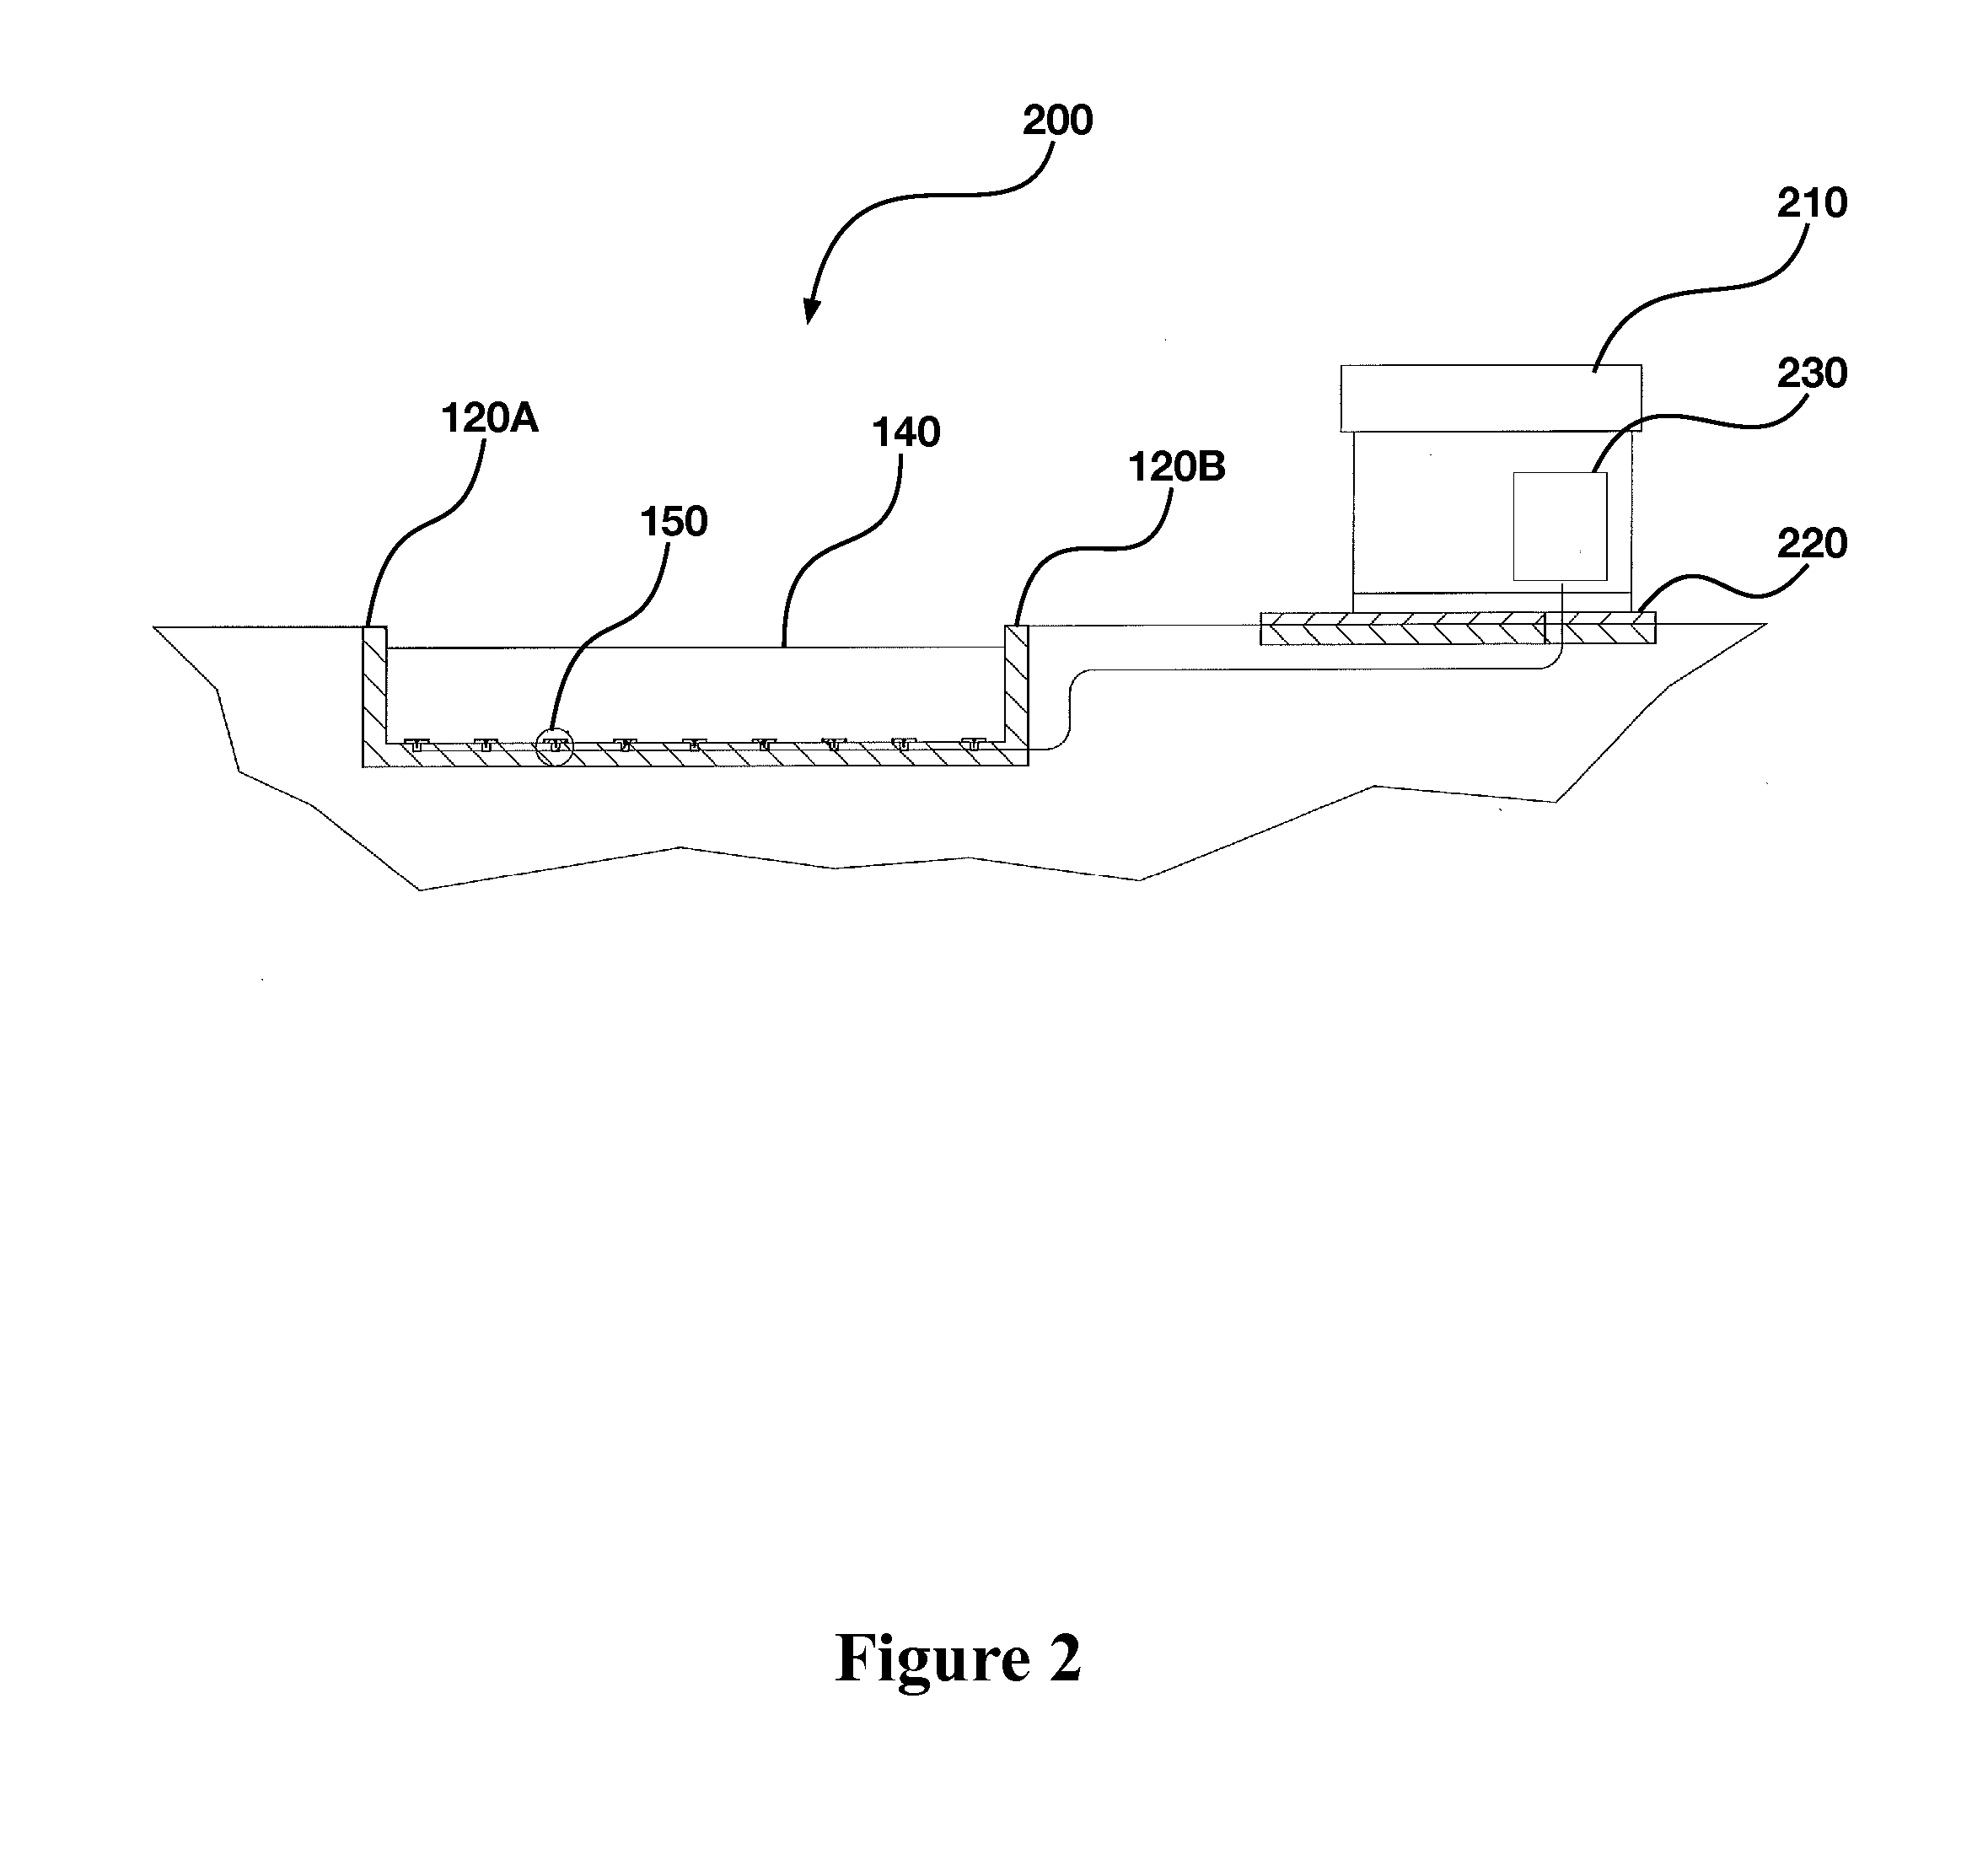 Apparatus and Methods for the Guidance of Fish